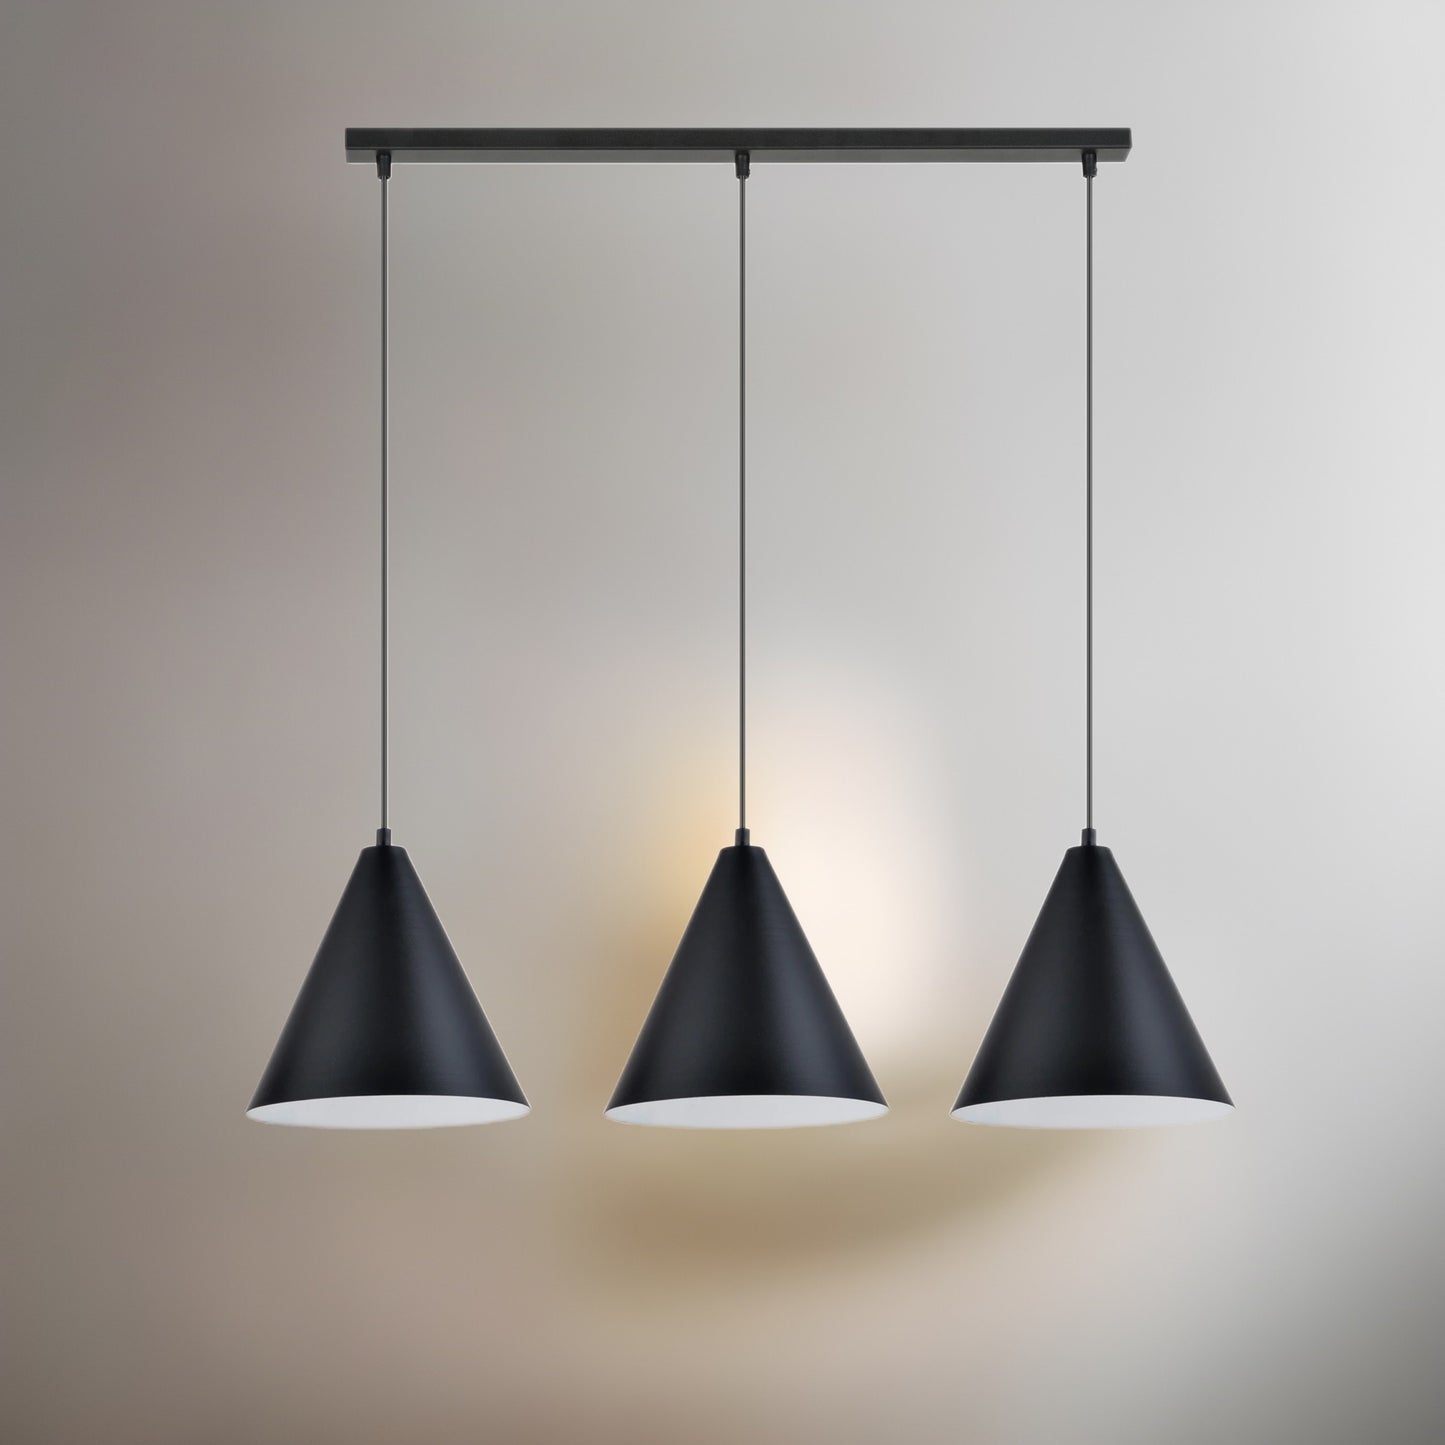 Accentuate your interior with a unique industrial style hanging lamp from the REBEL series. Made of durable steel, the lamp is characterized by a minimalist form. The black conical lampshade with a white interior not only adds character, but also optimizes light dispersion, providing pleasant, warm lighting. The perfect complement to modern spaces with a raw character.